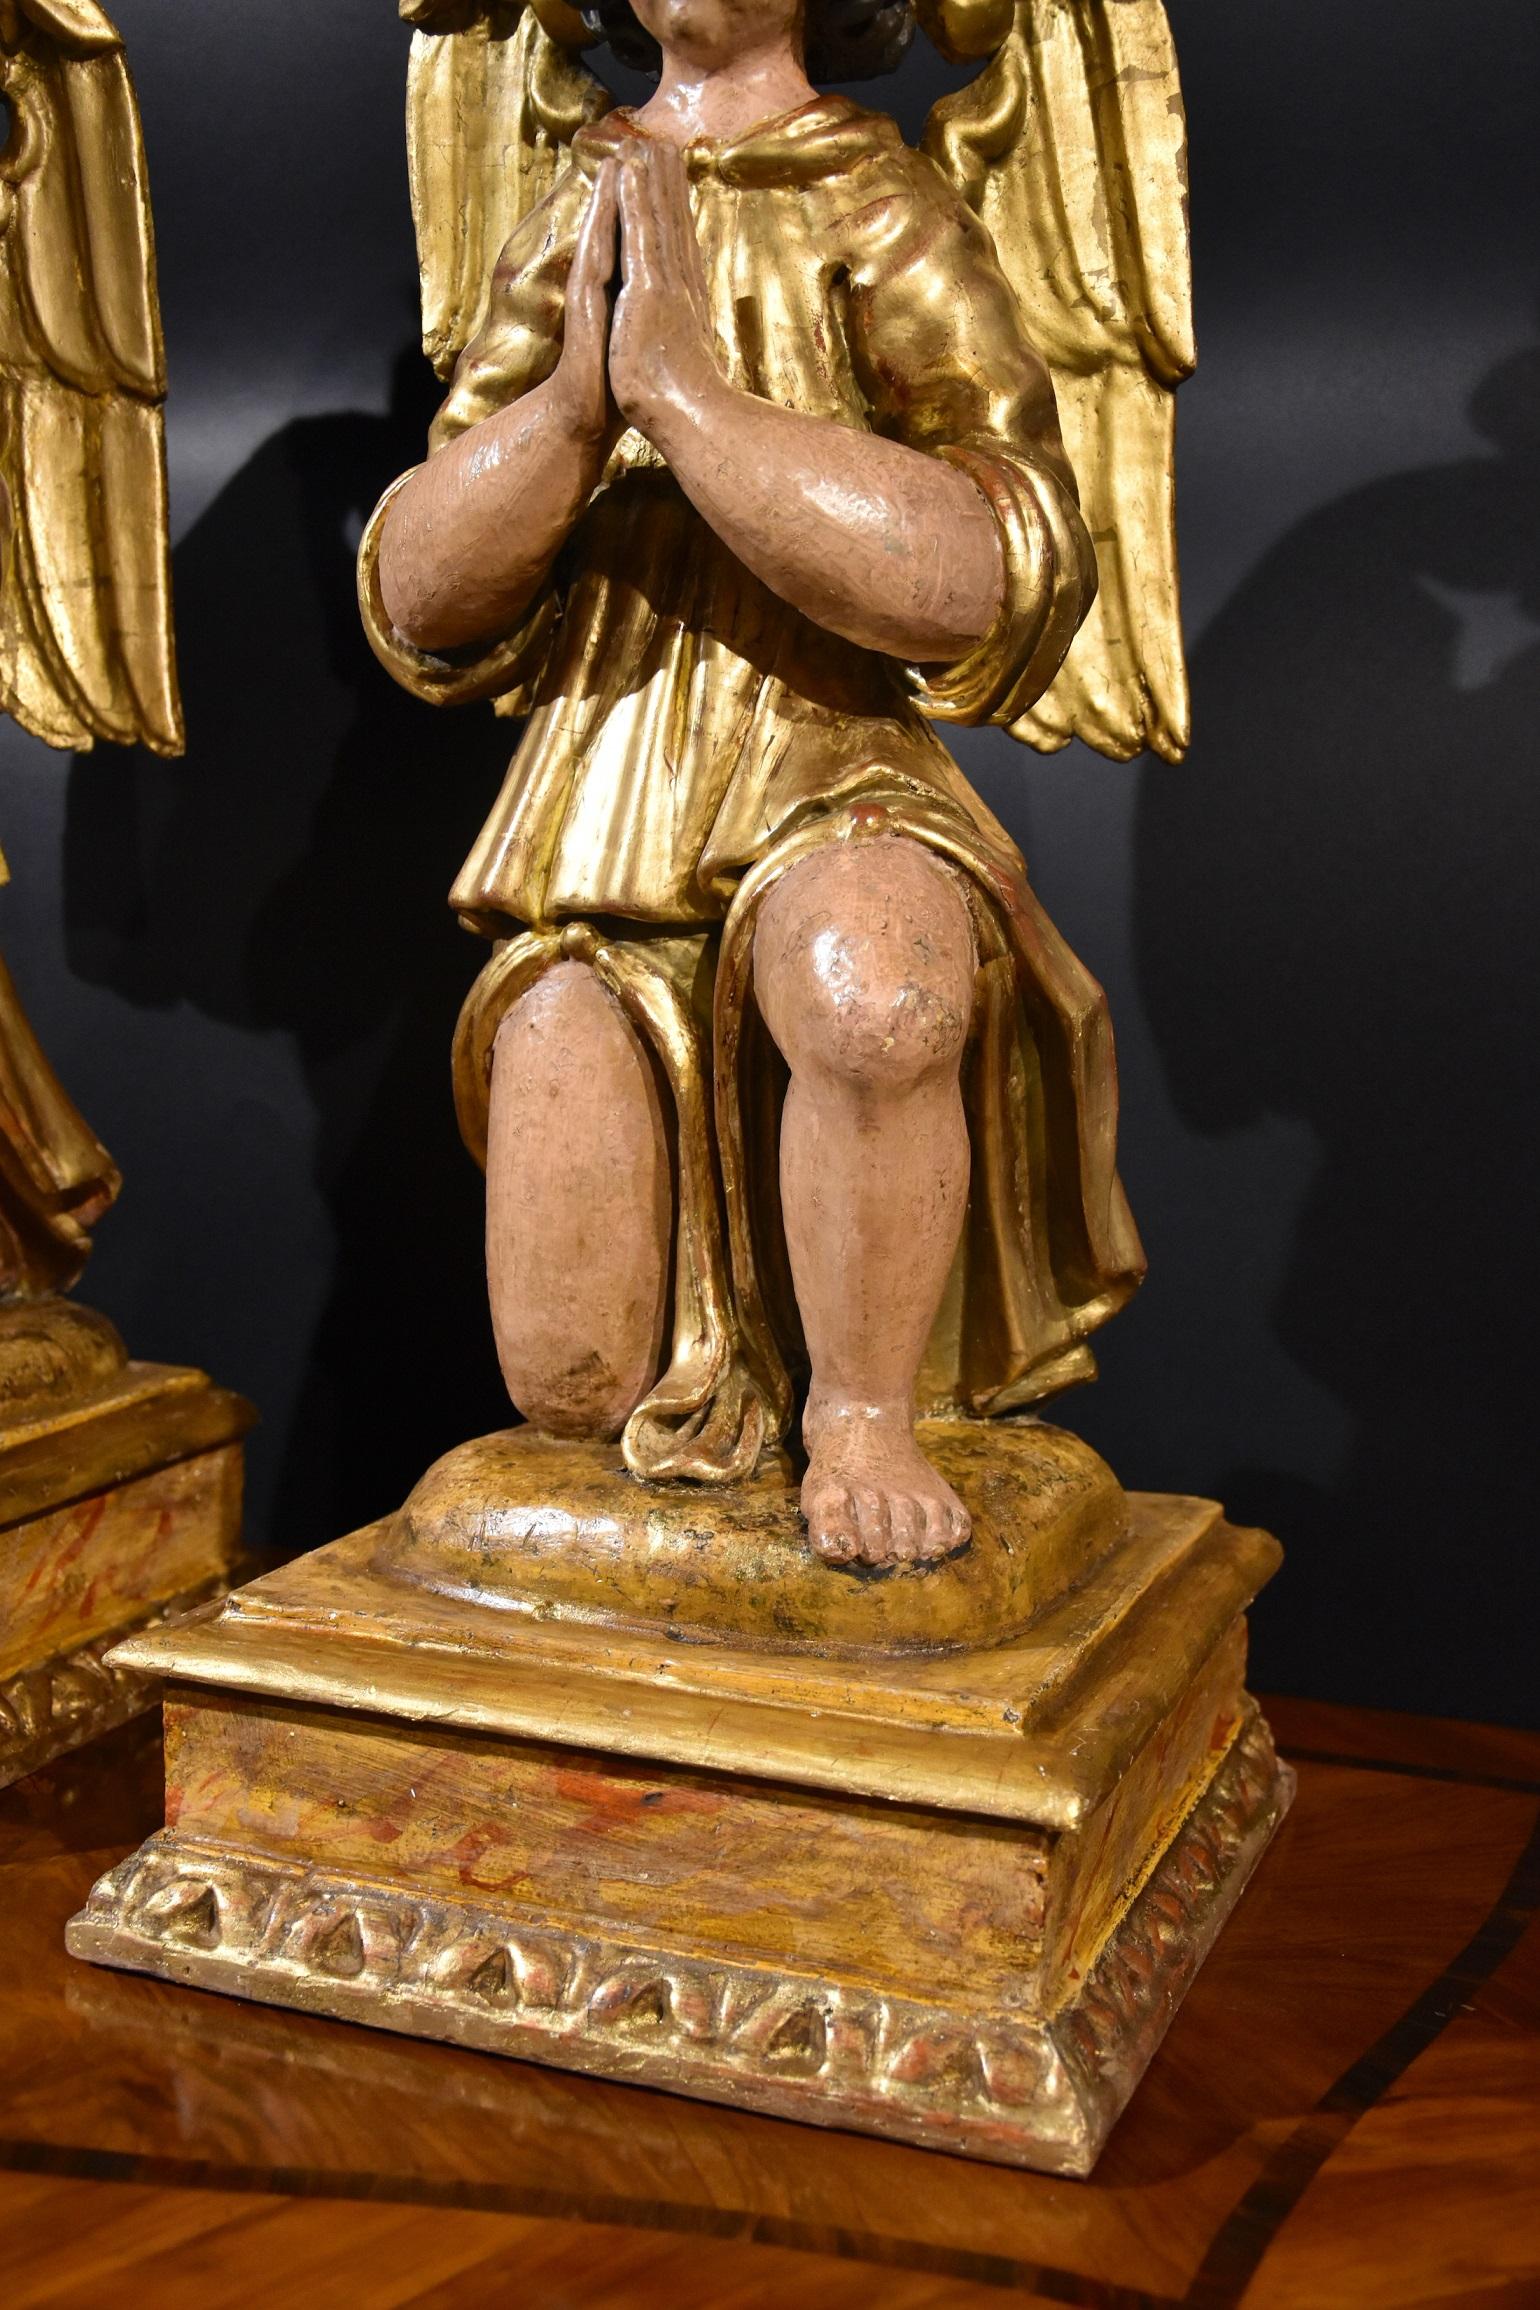 Pair of sculptures depicting two winged angels in carved wood

Tuscany, late 17th century

Carved, gilded and polychrome wood

Dimensions: Height 64 cm - width 29 cm. - depth 27 cm.

State of conservation: The sculptures are intact and are in good